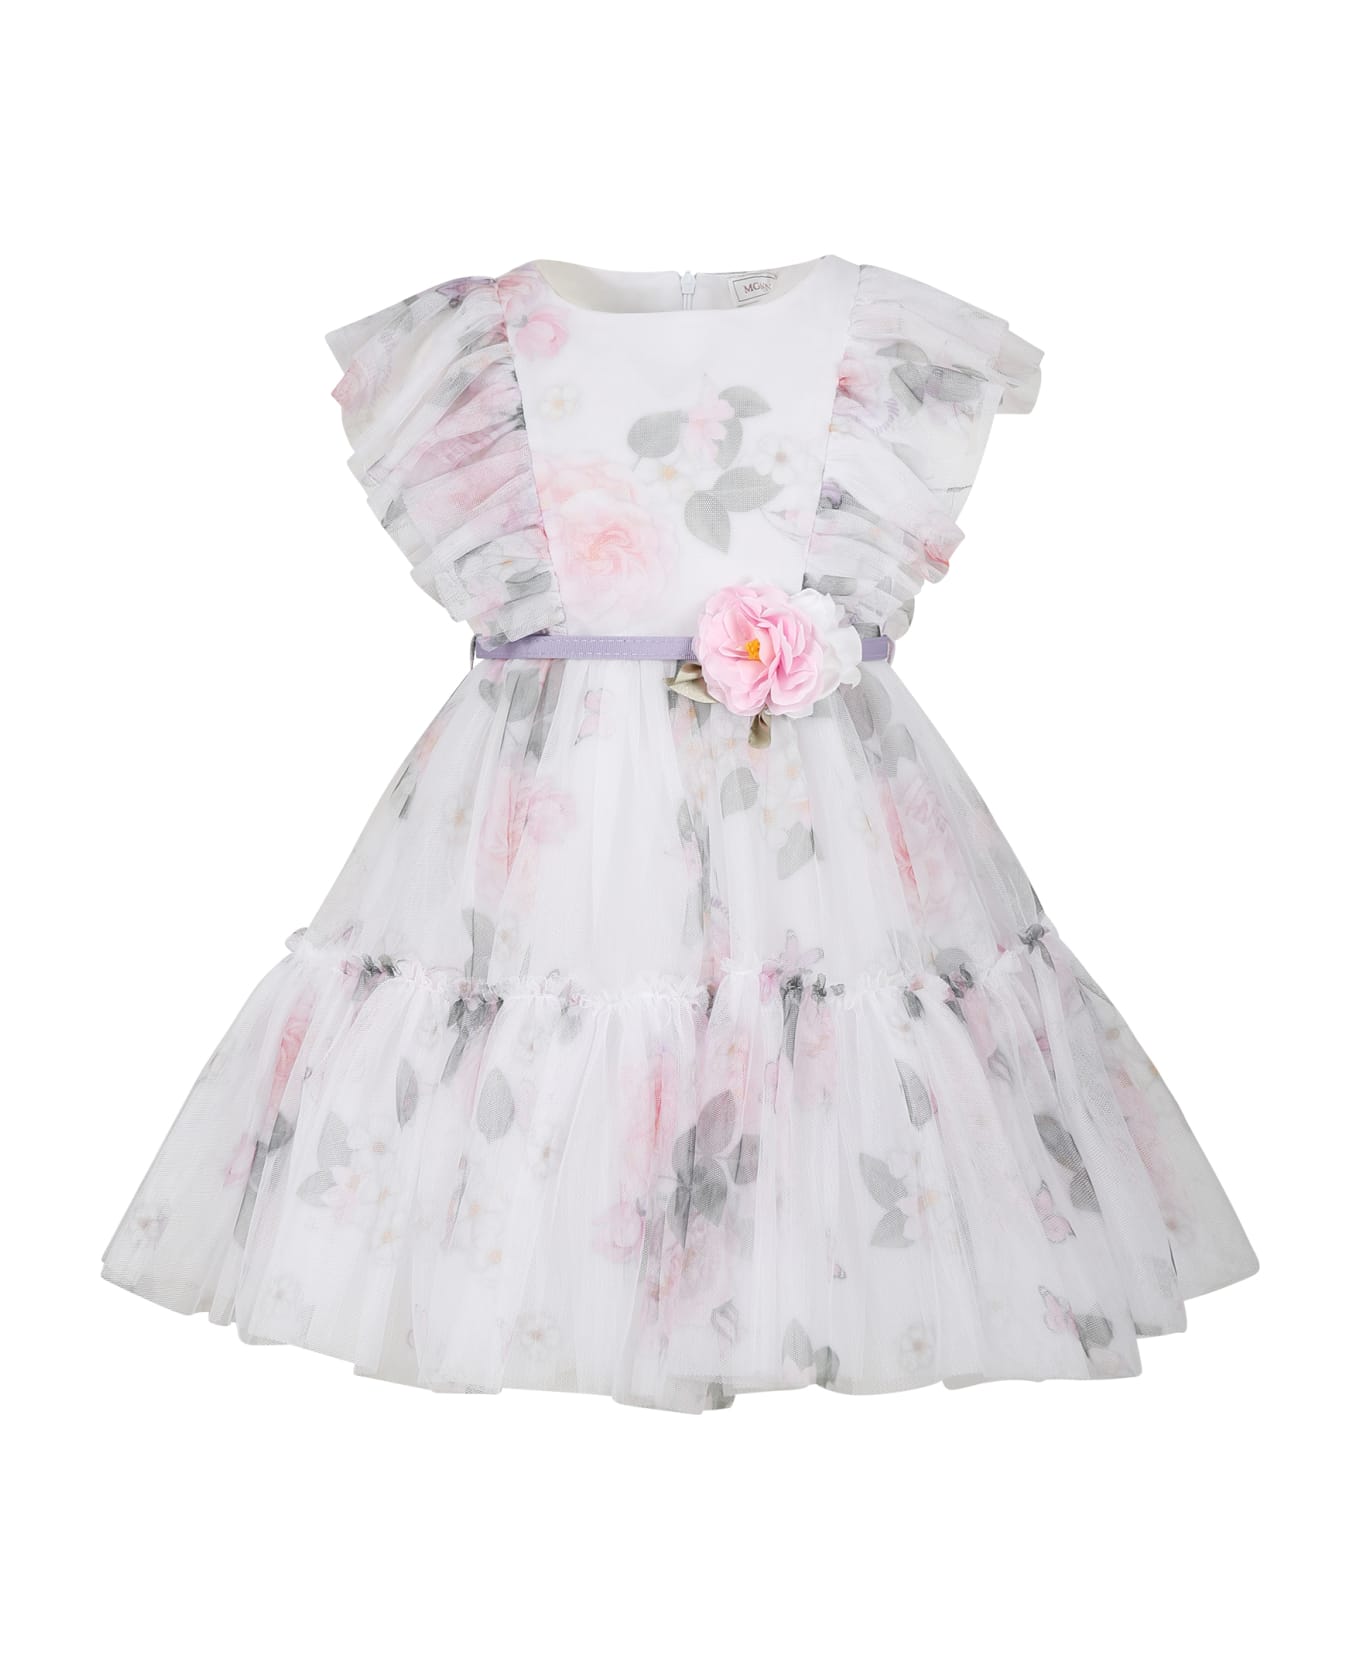 Monnalisa White Dress For Girl With Floral Print - White ワンピース＆ドレス